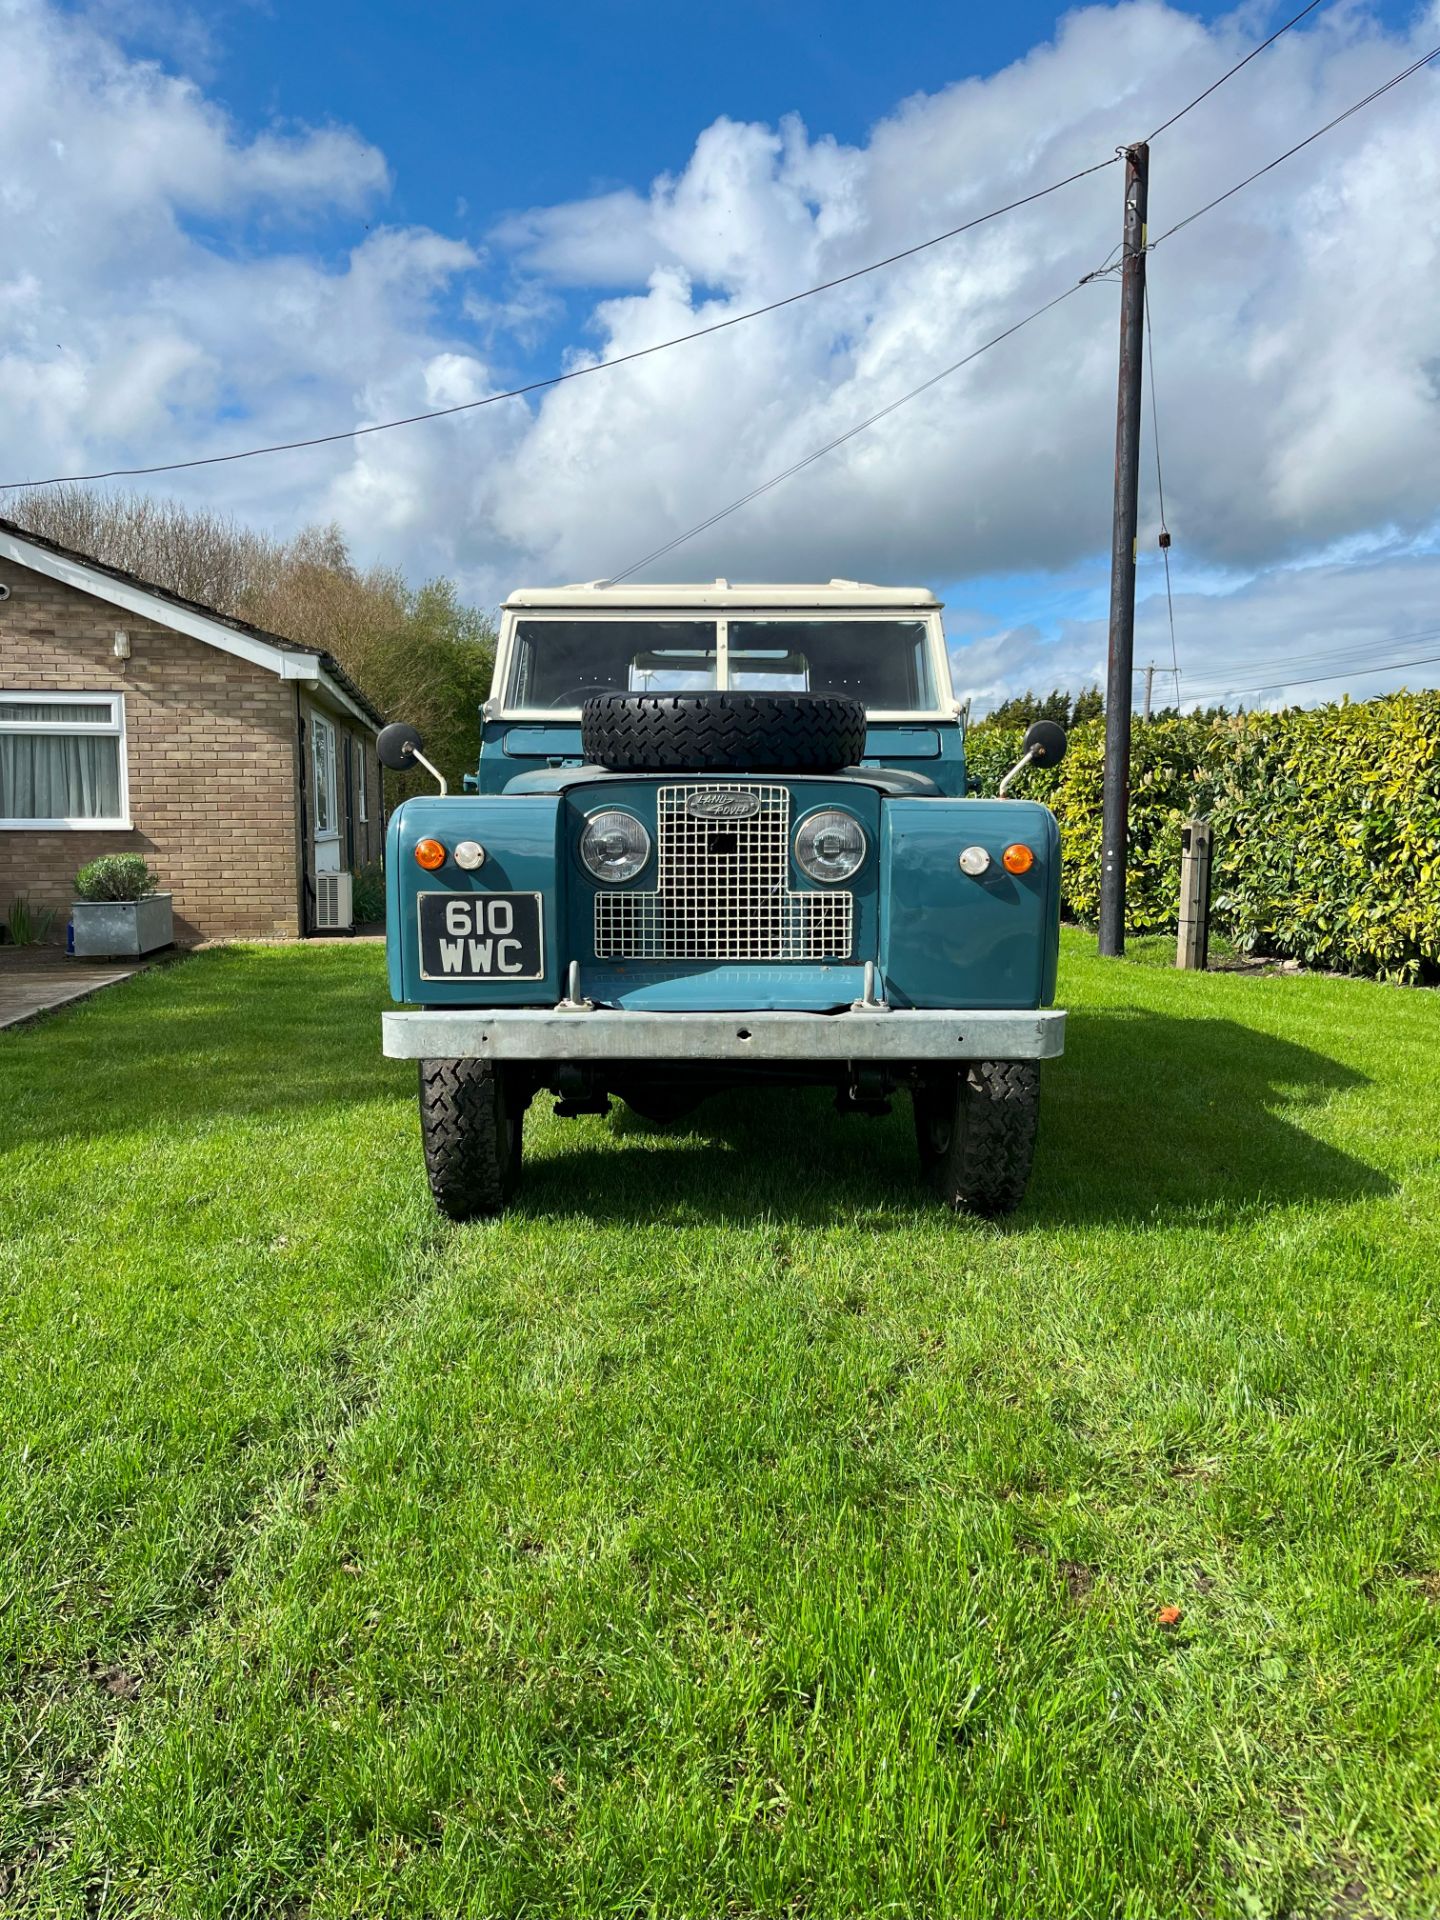 1962 Land Rover 88 Series II, petrol 2.25 litre engine, blue with 64,078 showing on the milometer, - Image 14 of 14